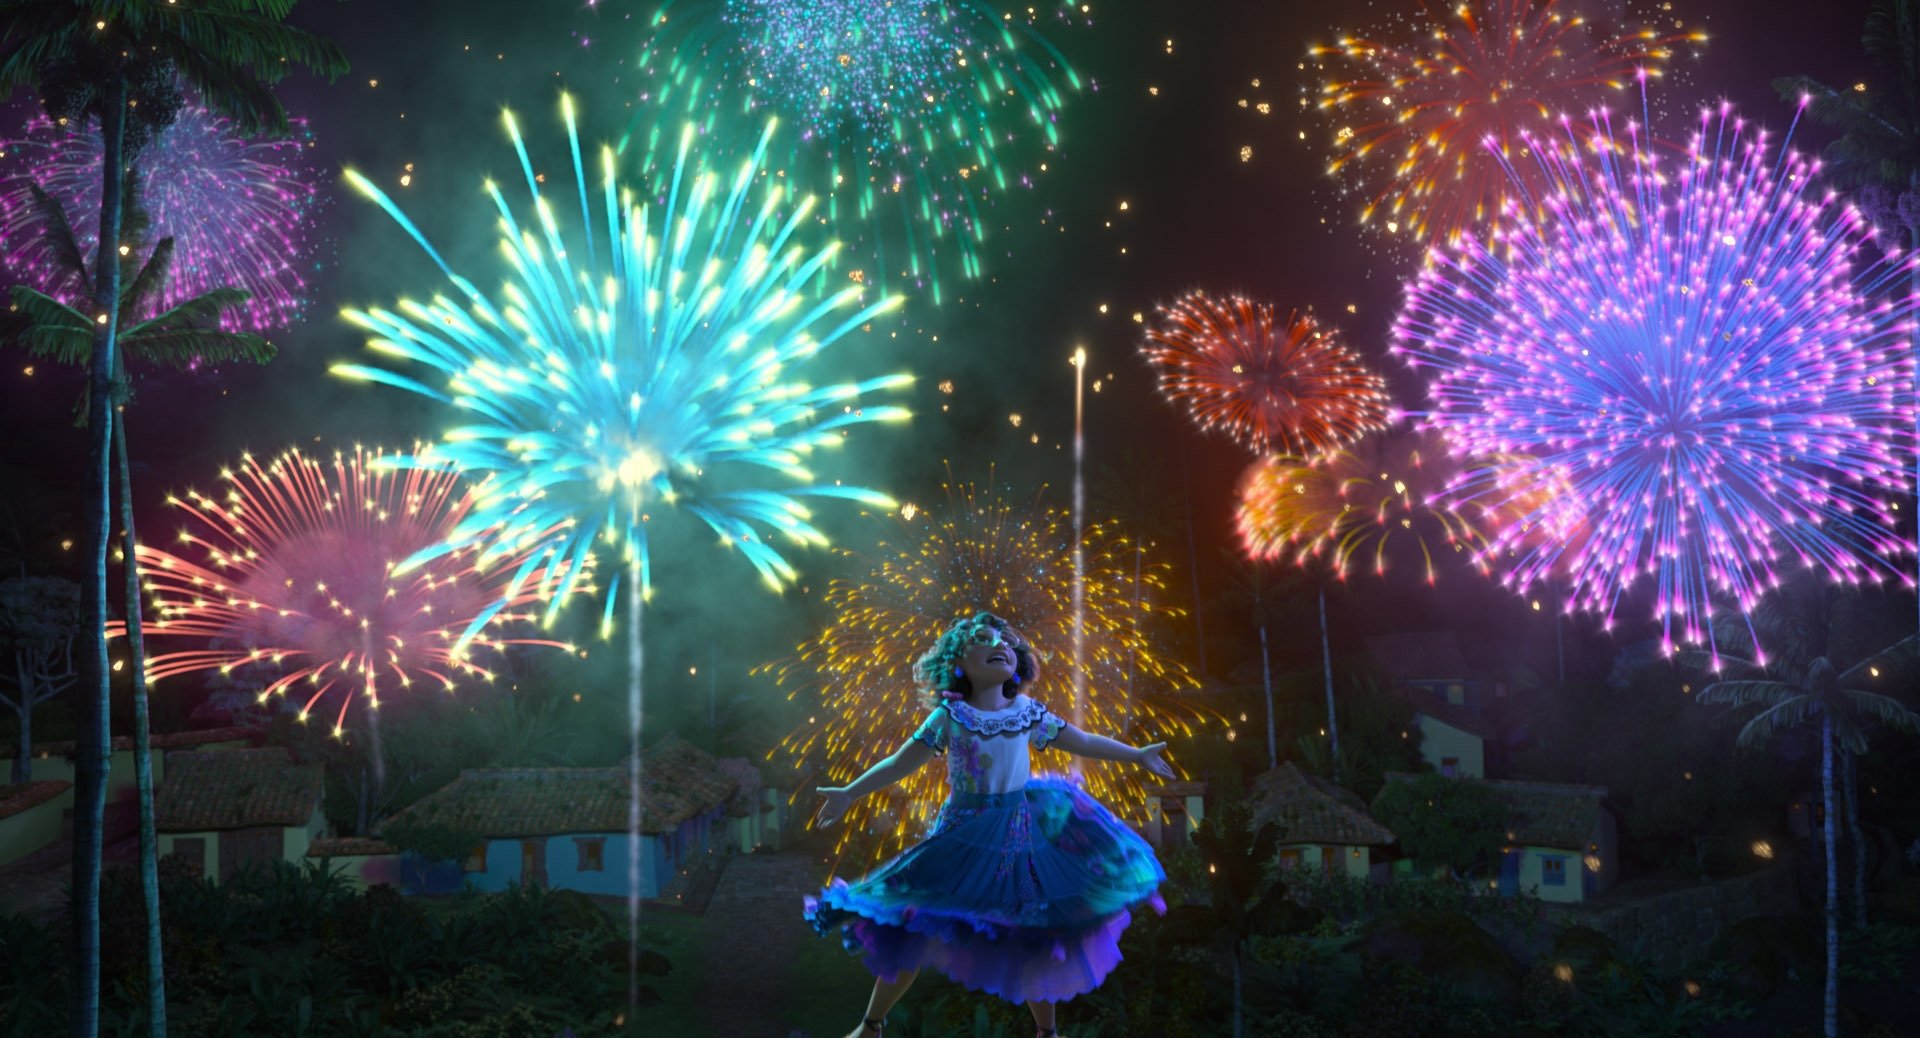 This image released by Disney shows Mirabel, voiced by Stephanie Beatriz, in a scene from the animated film 